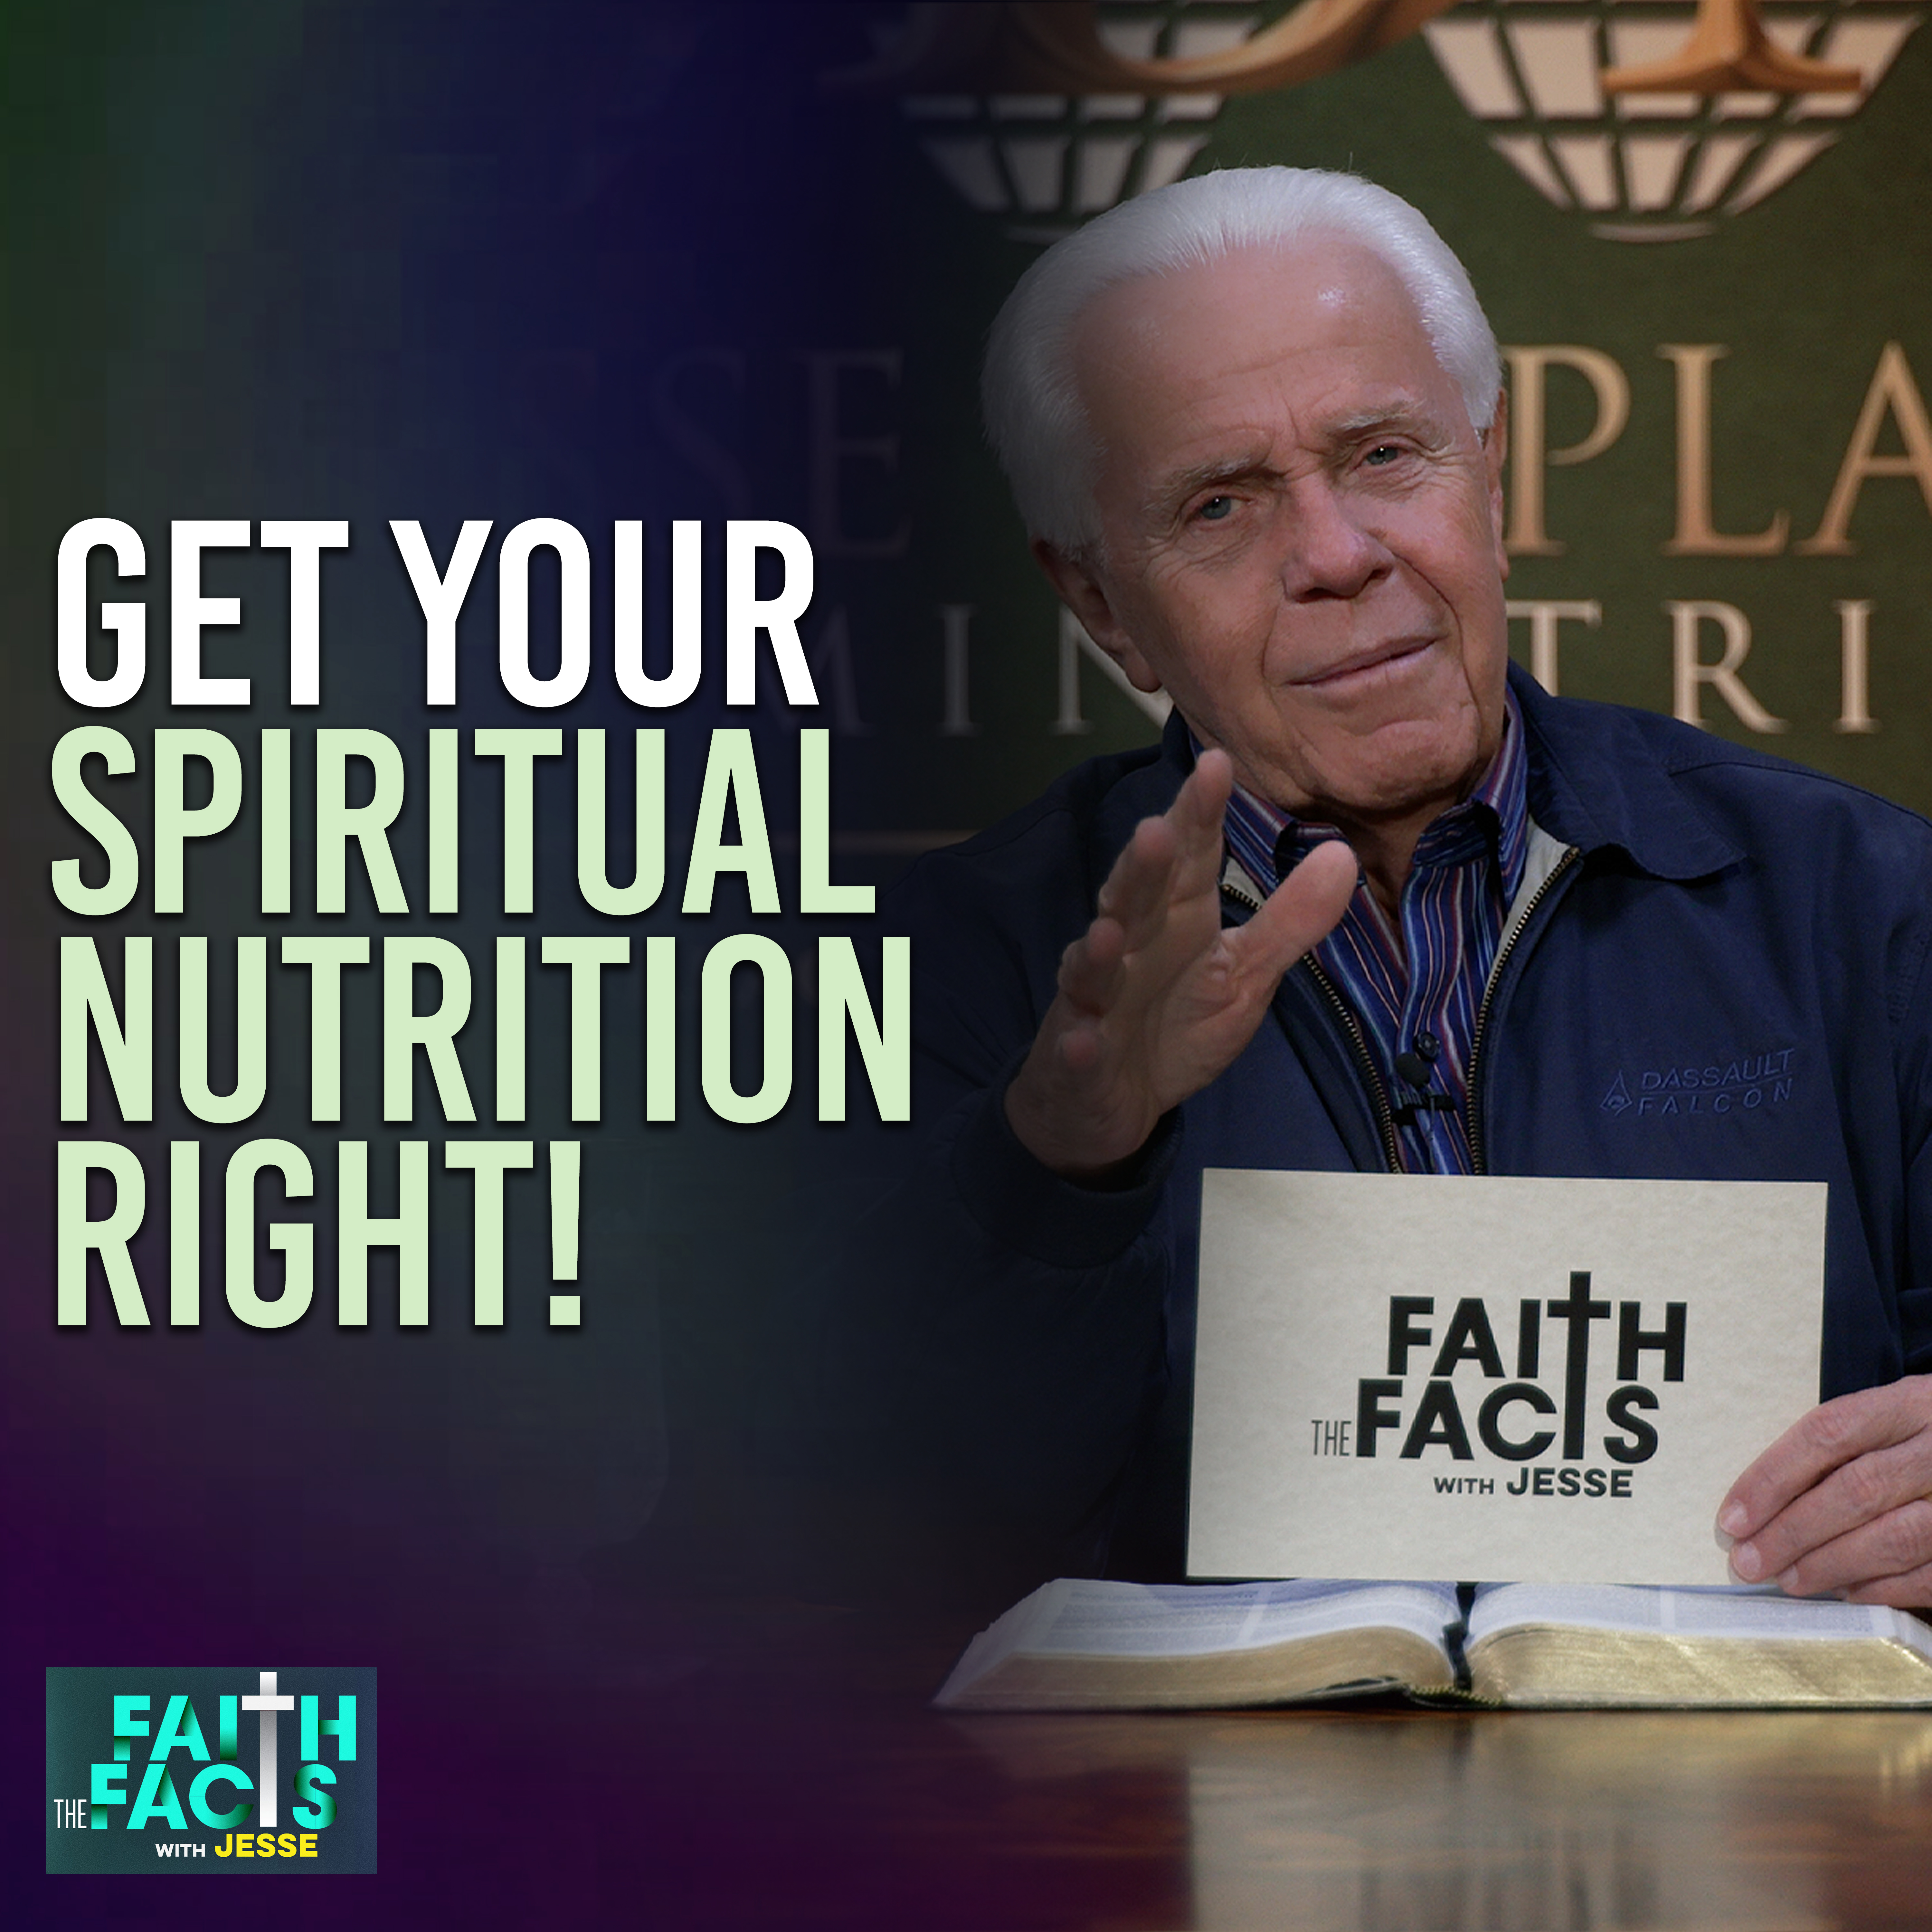 Get Your Spiritual Nutrition Right!